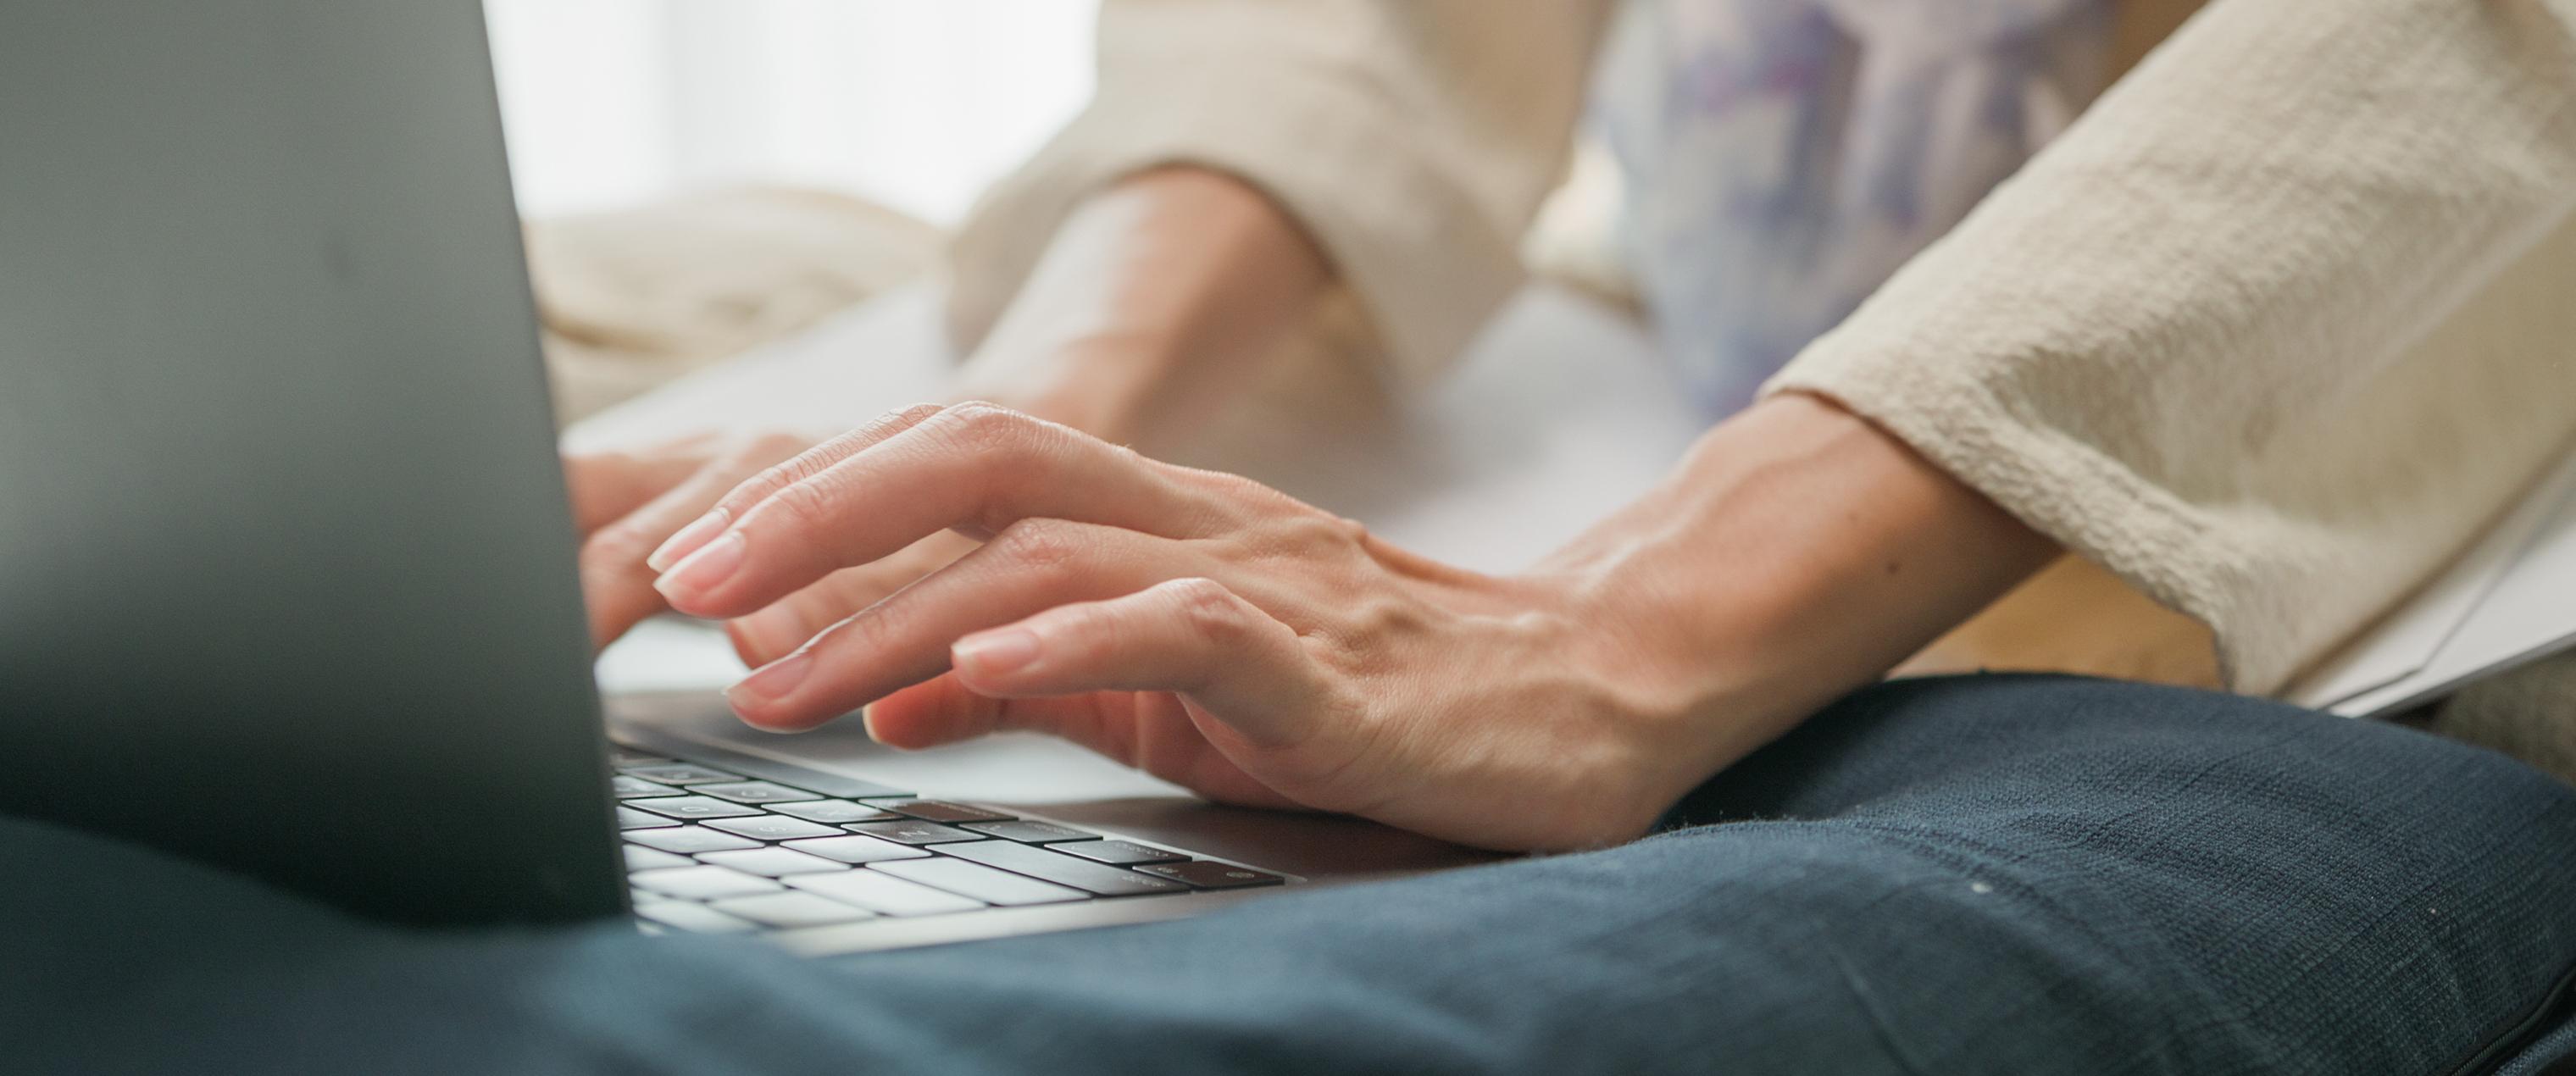 Close up of hands working on a laptop